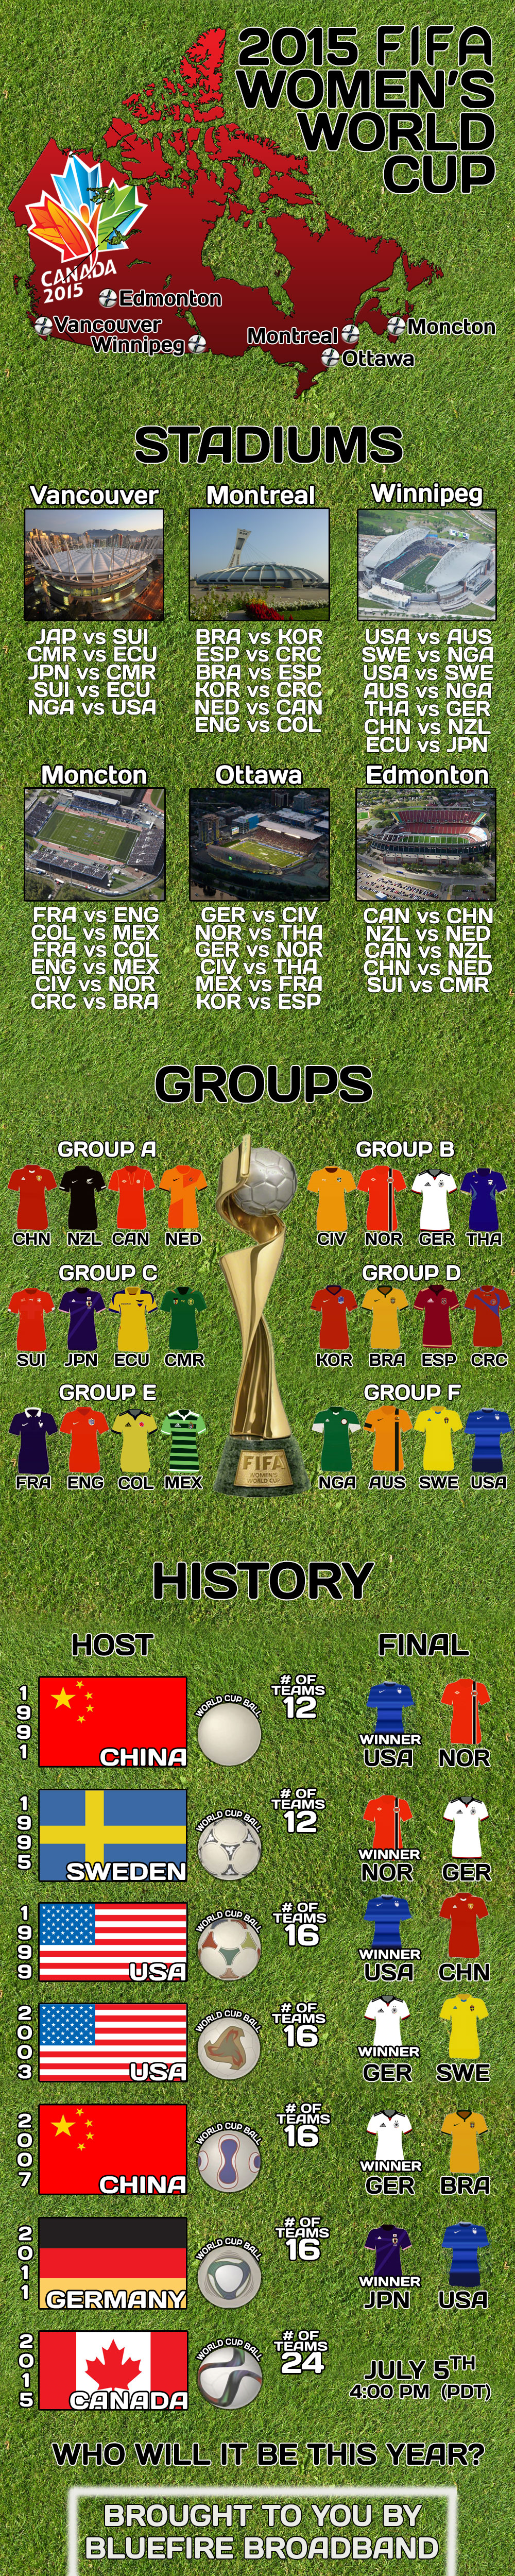 FIFA Women's World Cup by BlueFireCable.com [INFOGRAPHIC]